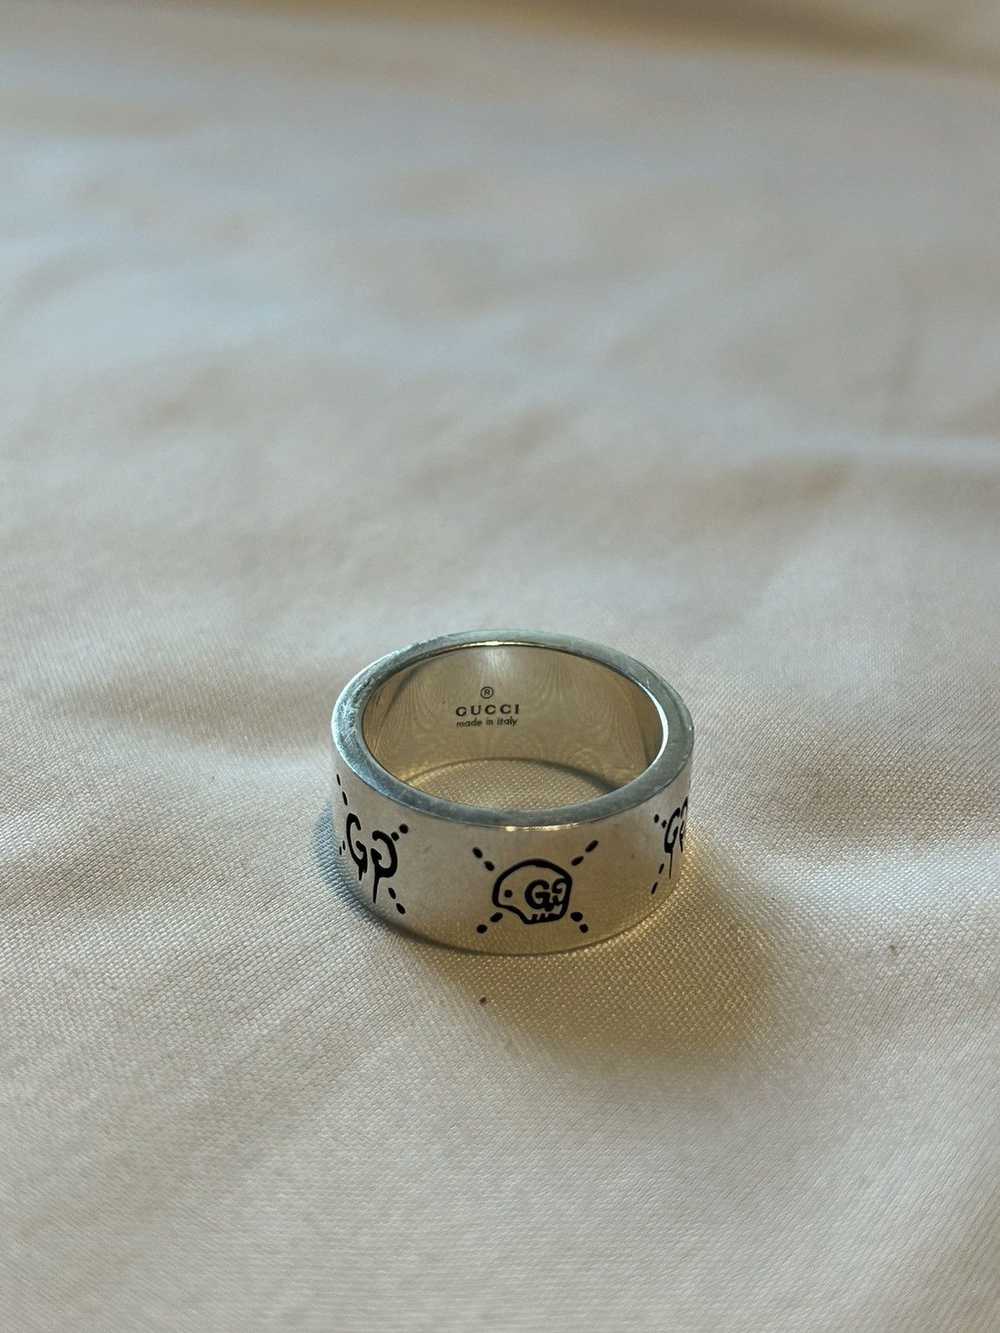 Gucci Silver Gucci Ghost Ring Size 7.5 - image 1